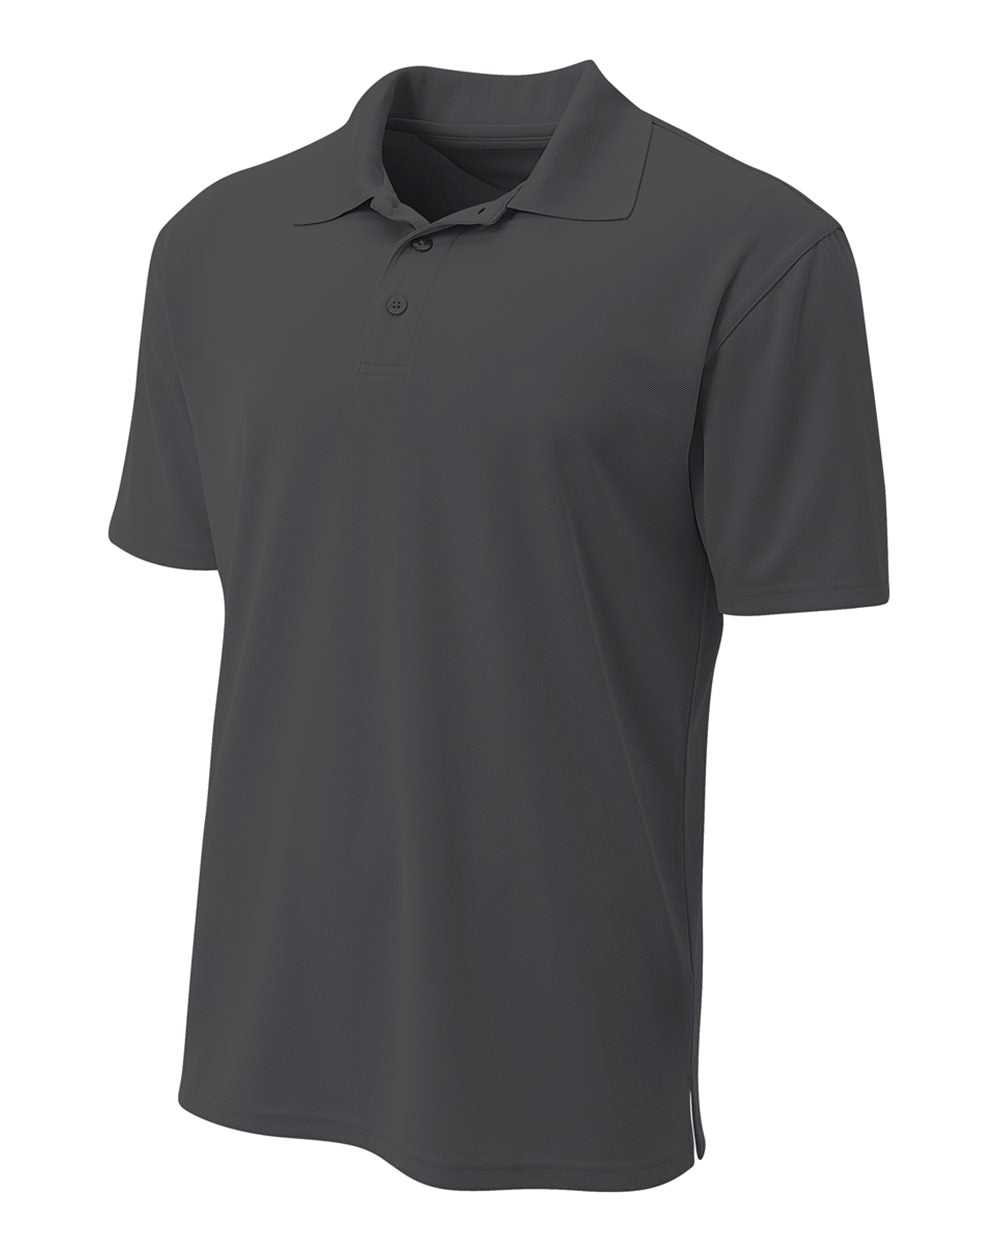 A4 N3008 Performance Pique Polo - Graphite - HIT a Double